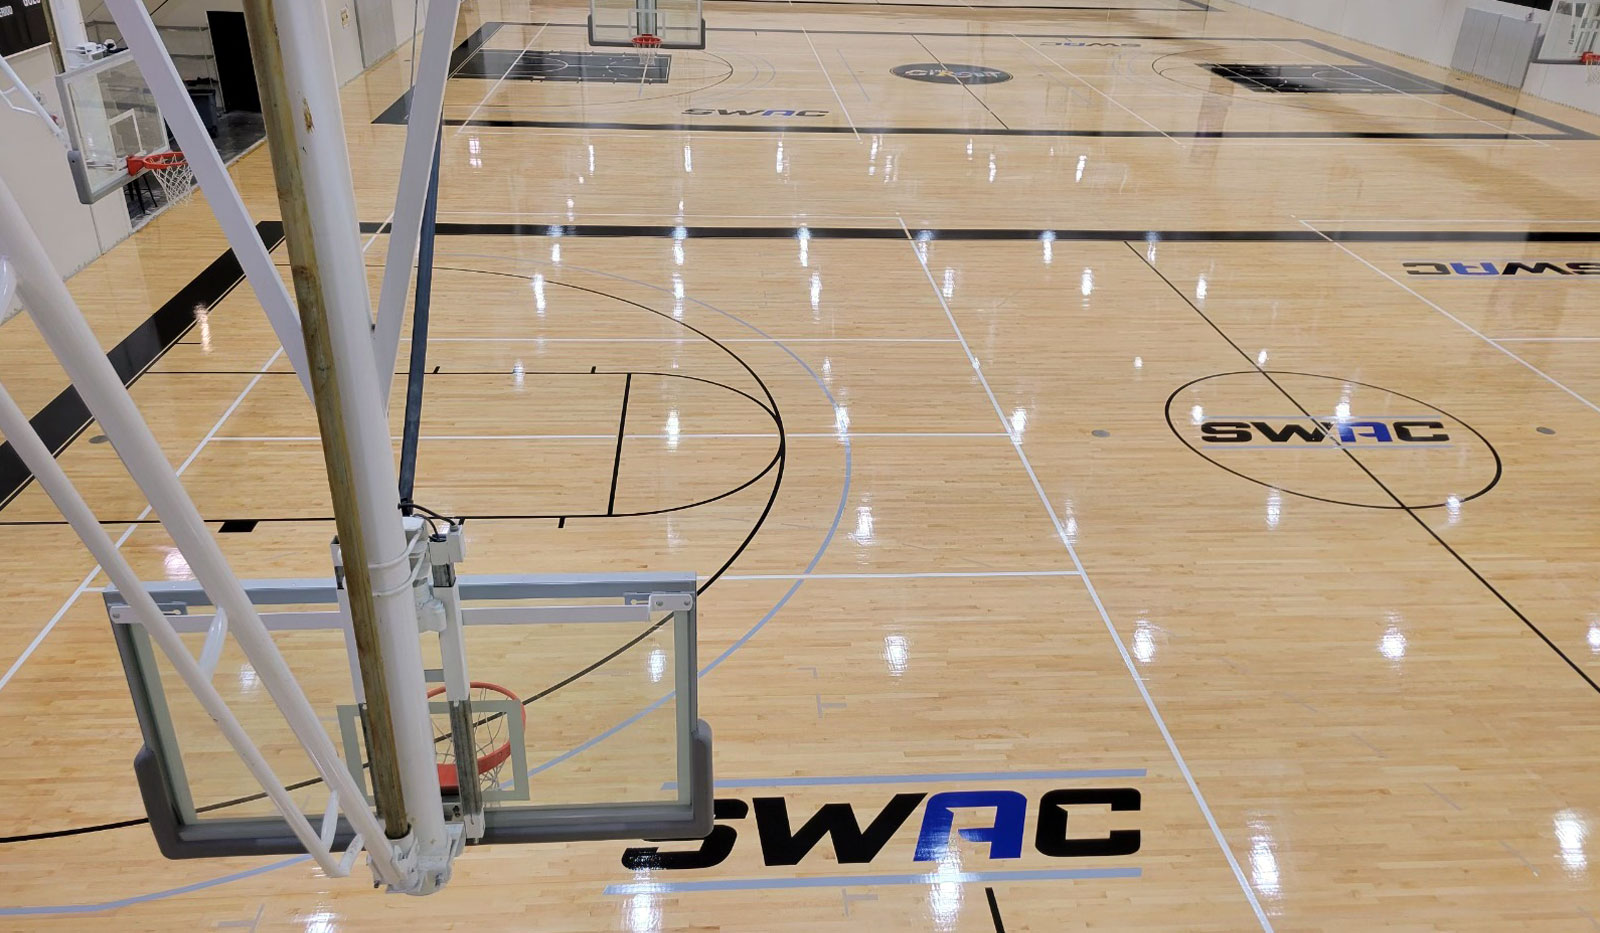 http://swac%20full%20courts%20shot